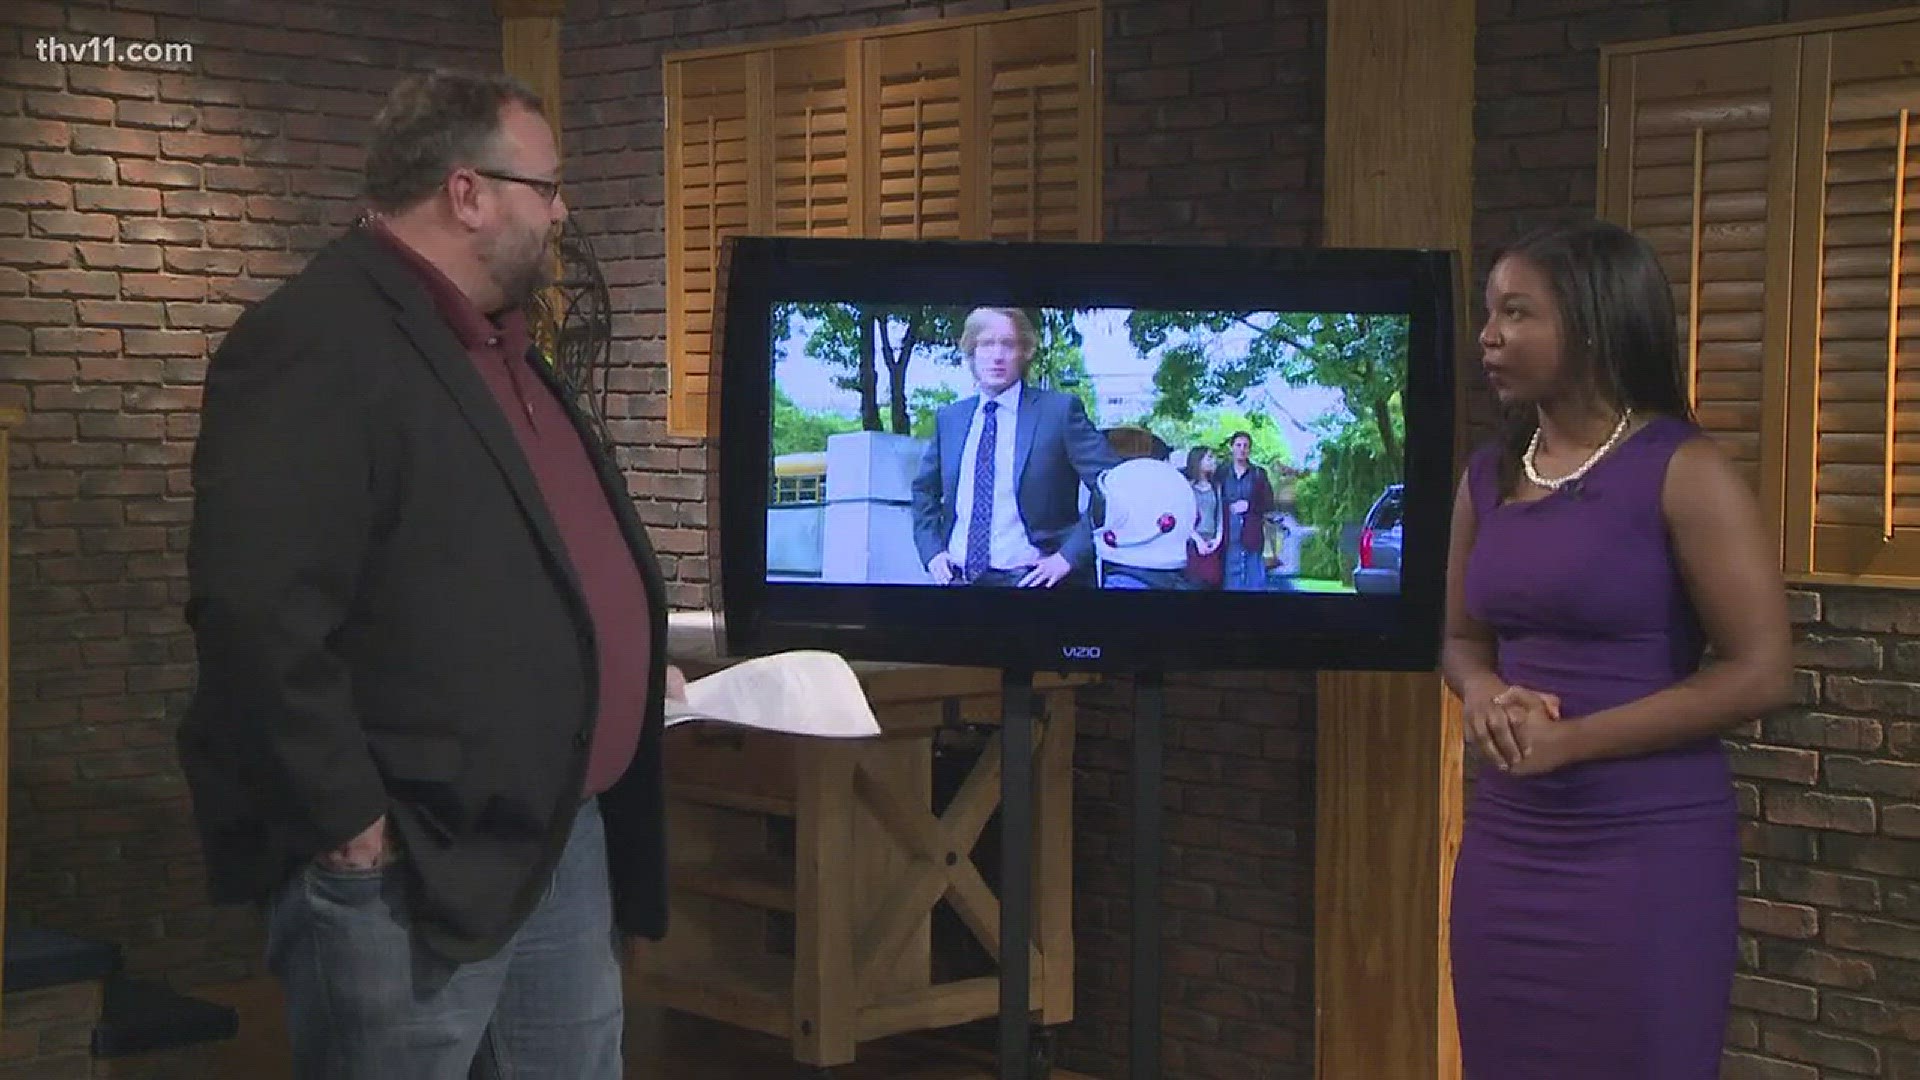 THV11's movie critic Jonathan Nettles tells us what's in theaters this weekend